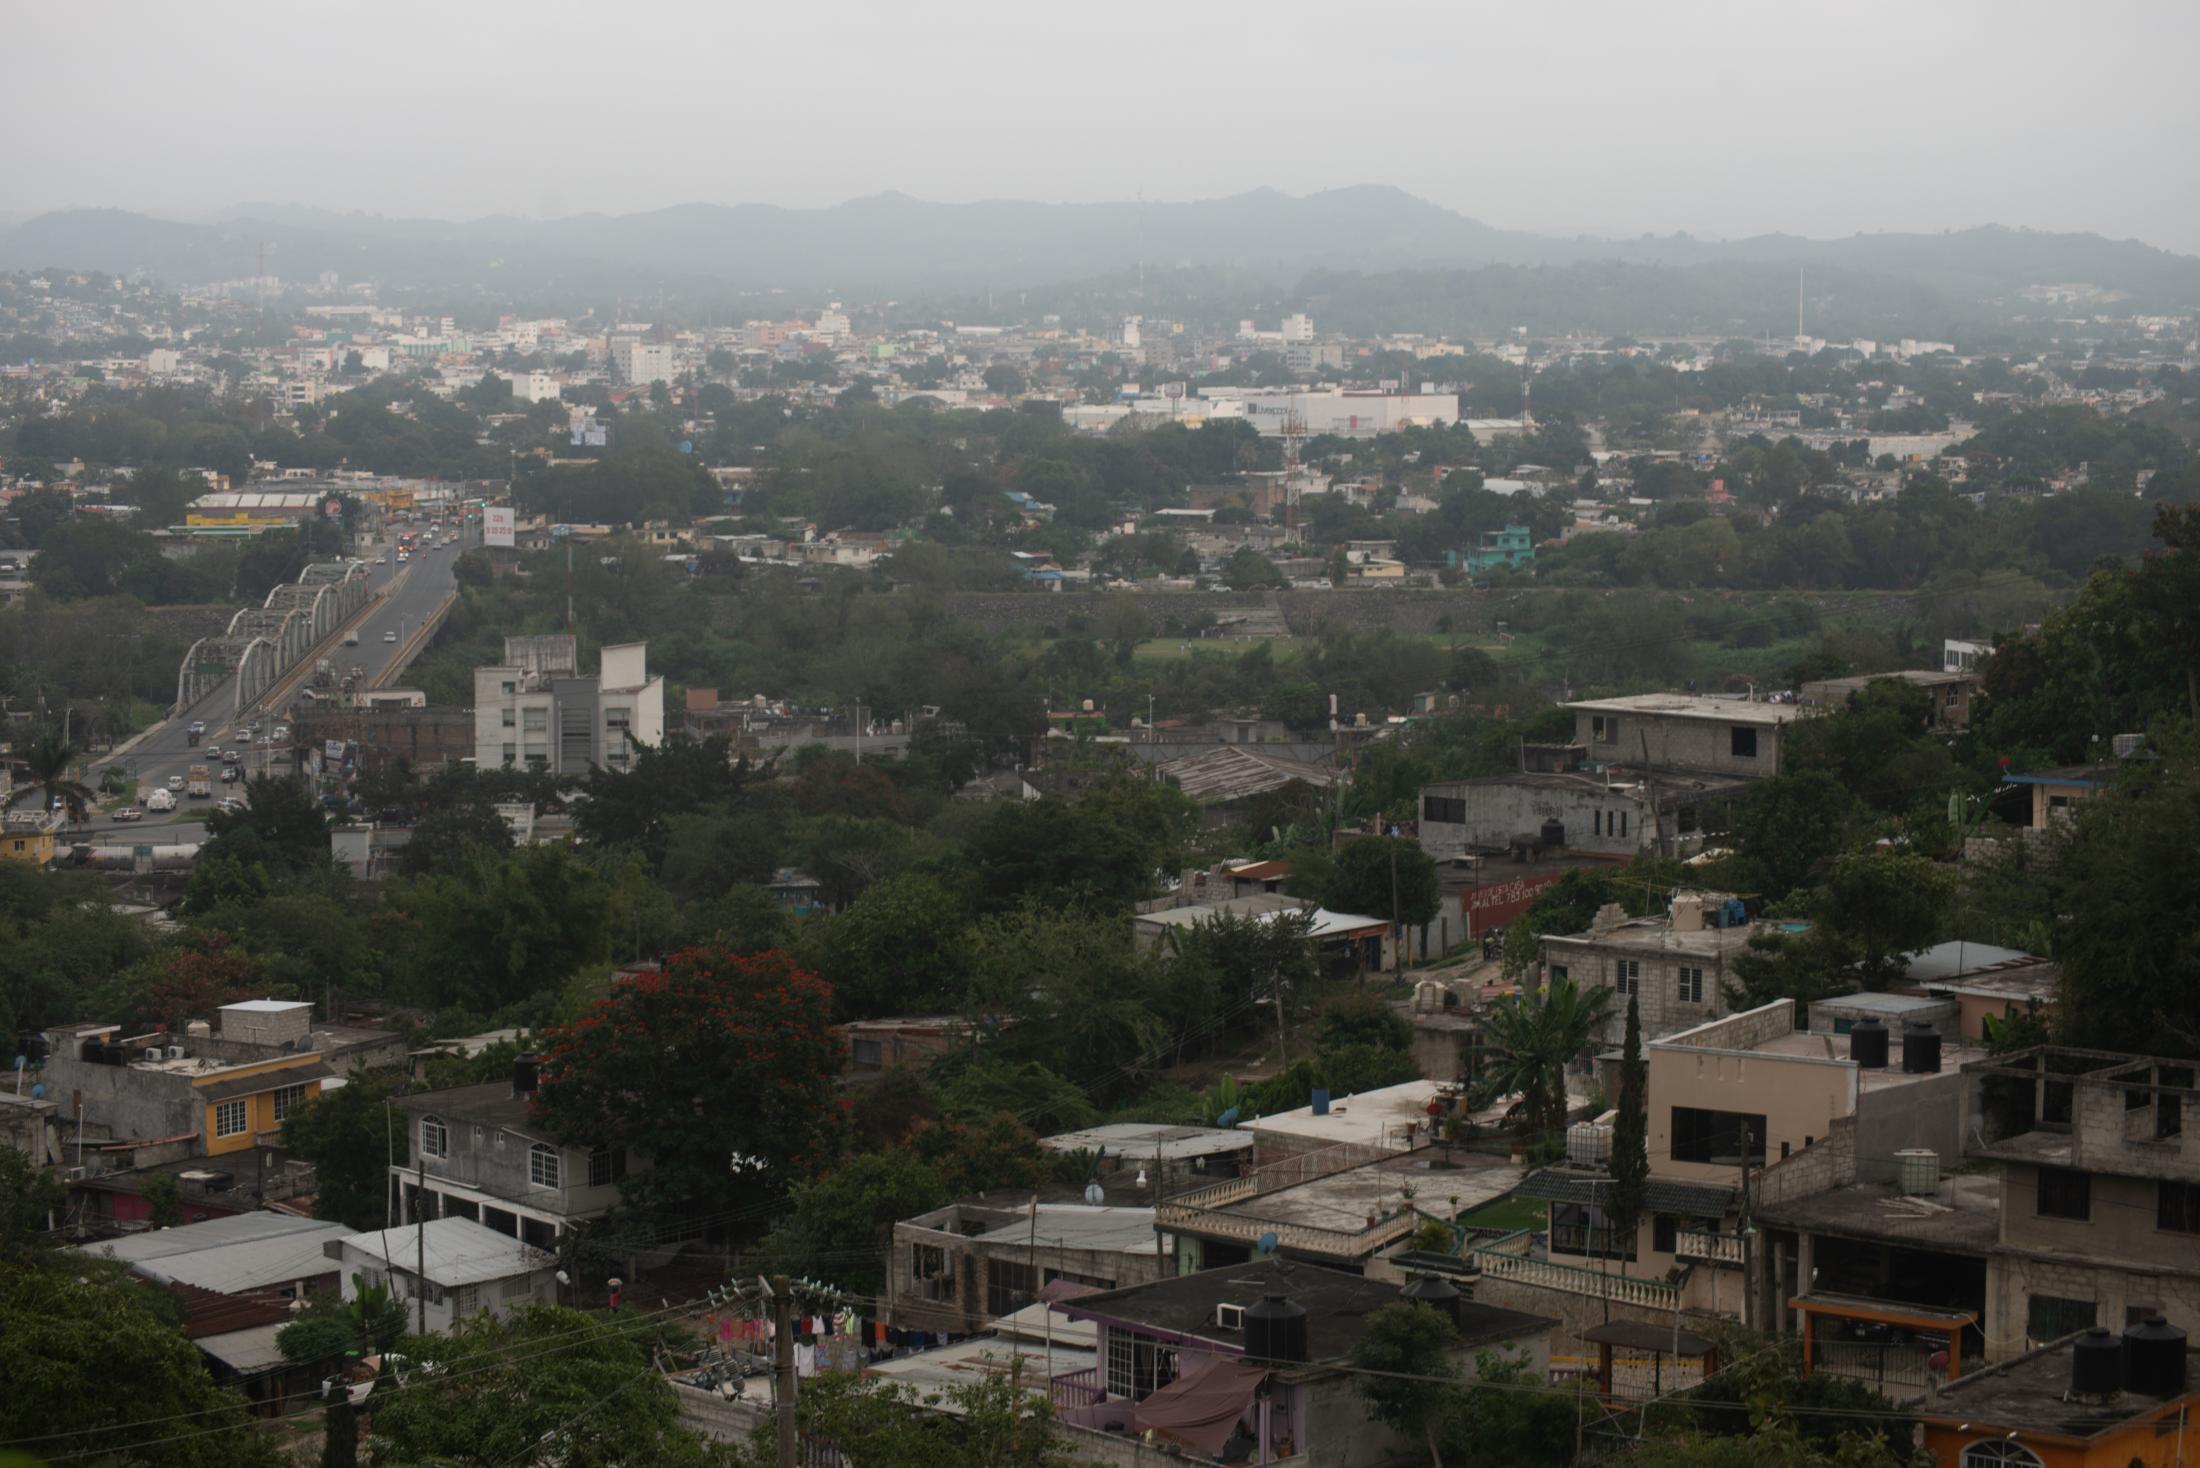 View of a neighborhood near the field that is investigated by police authorities and family groups participating in the fifth National Missing Persons Search Brigade in Tihuatlan, Veracruz, Mexico, on February 20, 2020. Victoria Razo for NPR